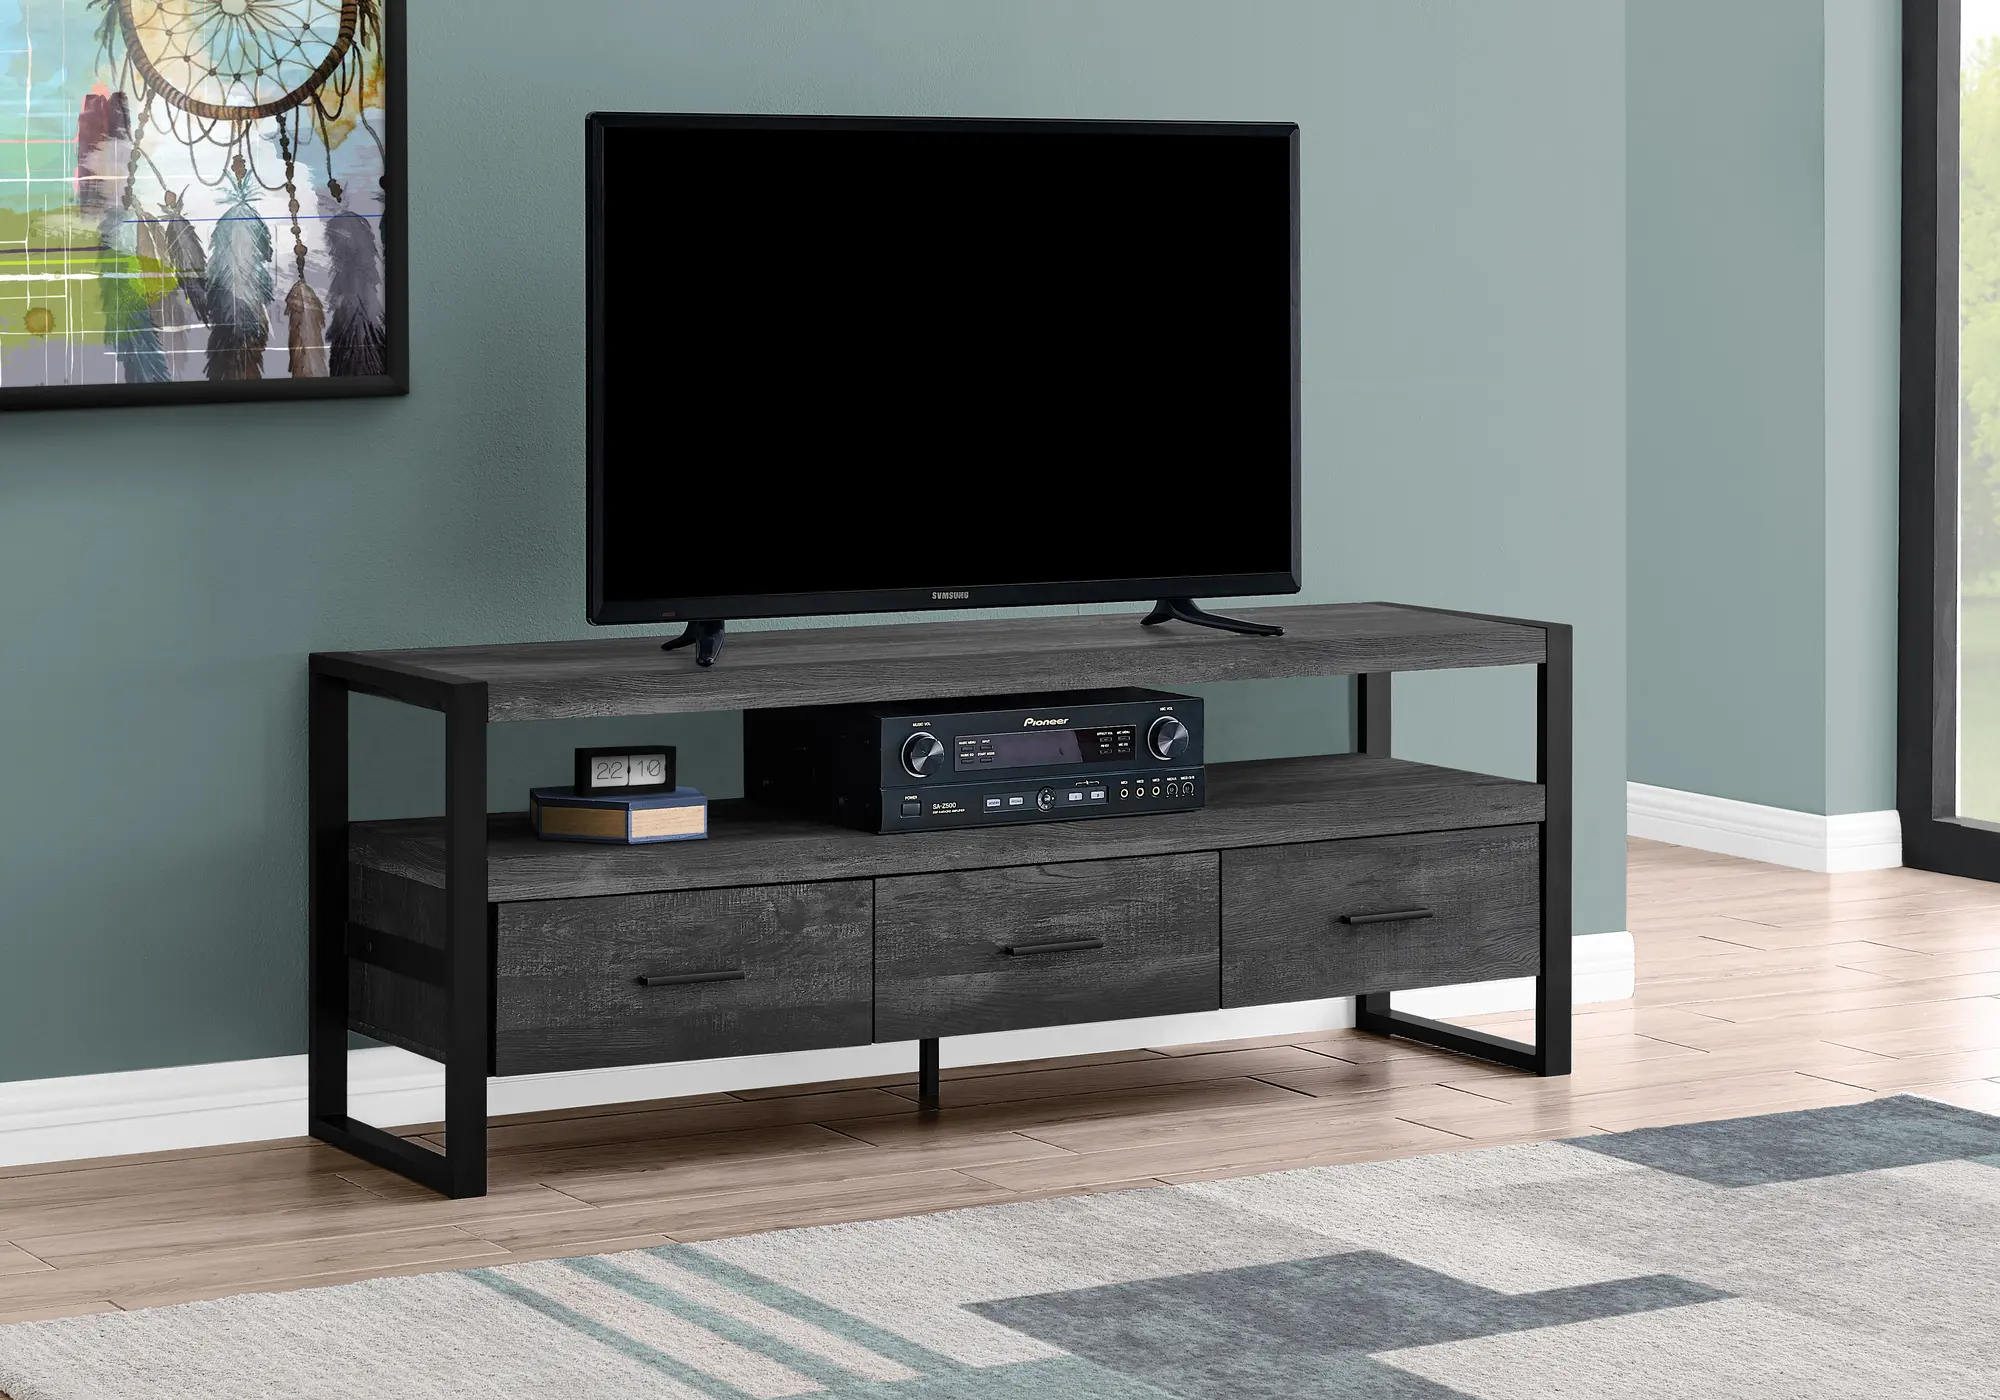 Photos - Mount/Stand Monarch Specialties Industrial Black 3 Drawer TV Stand I 2823 